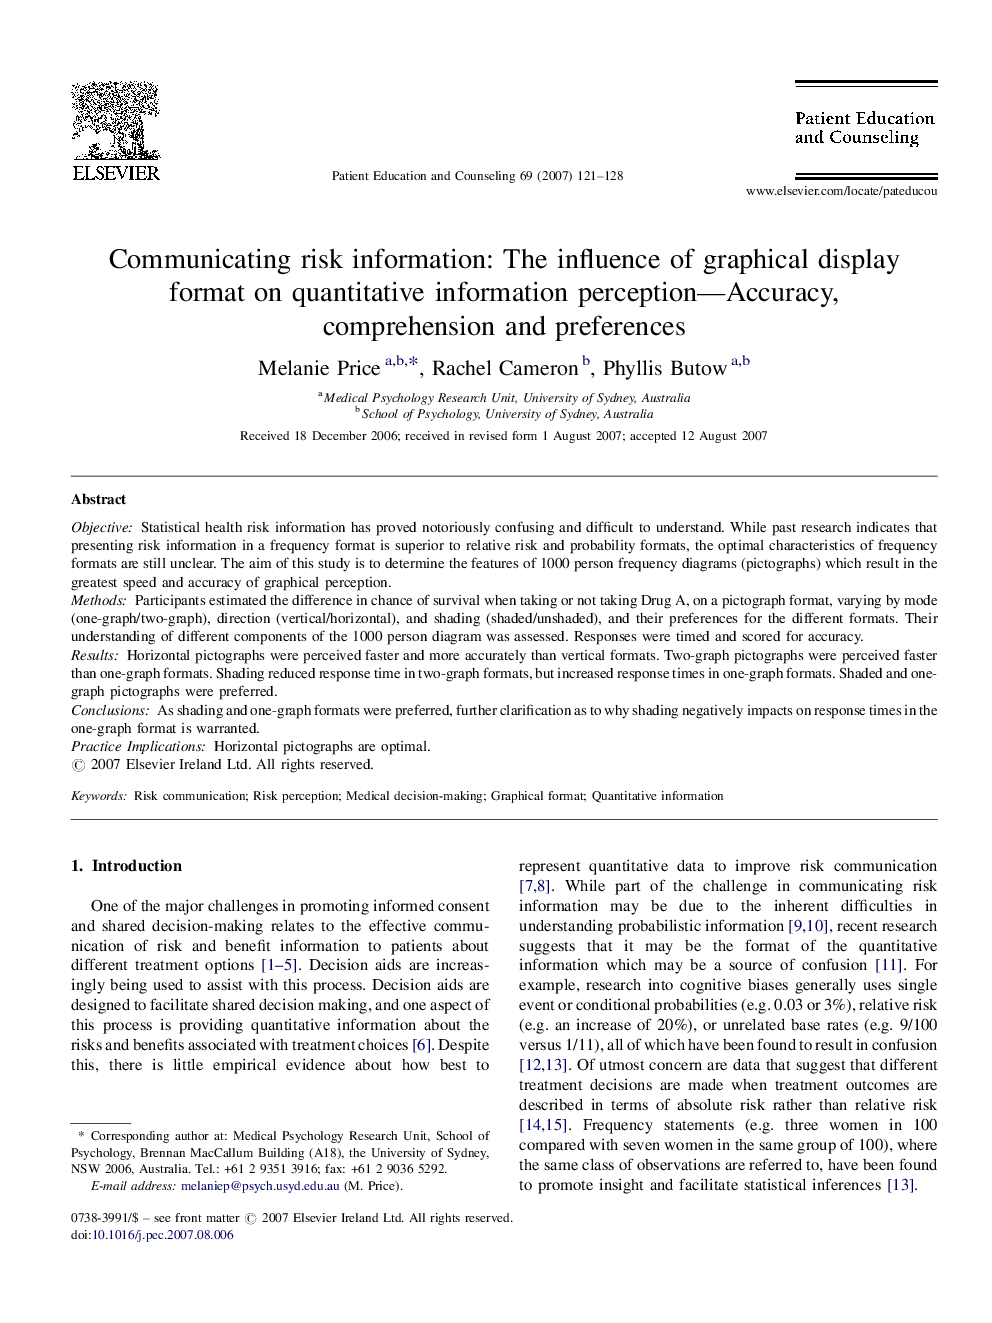 Communicating risk information: The influence of graphical display format on quantitative information perception—Accuracy, comprehension and preferences